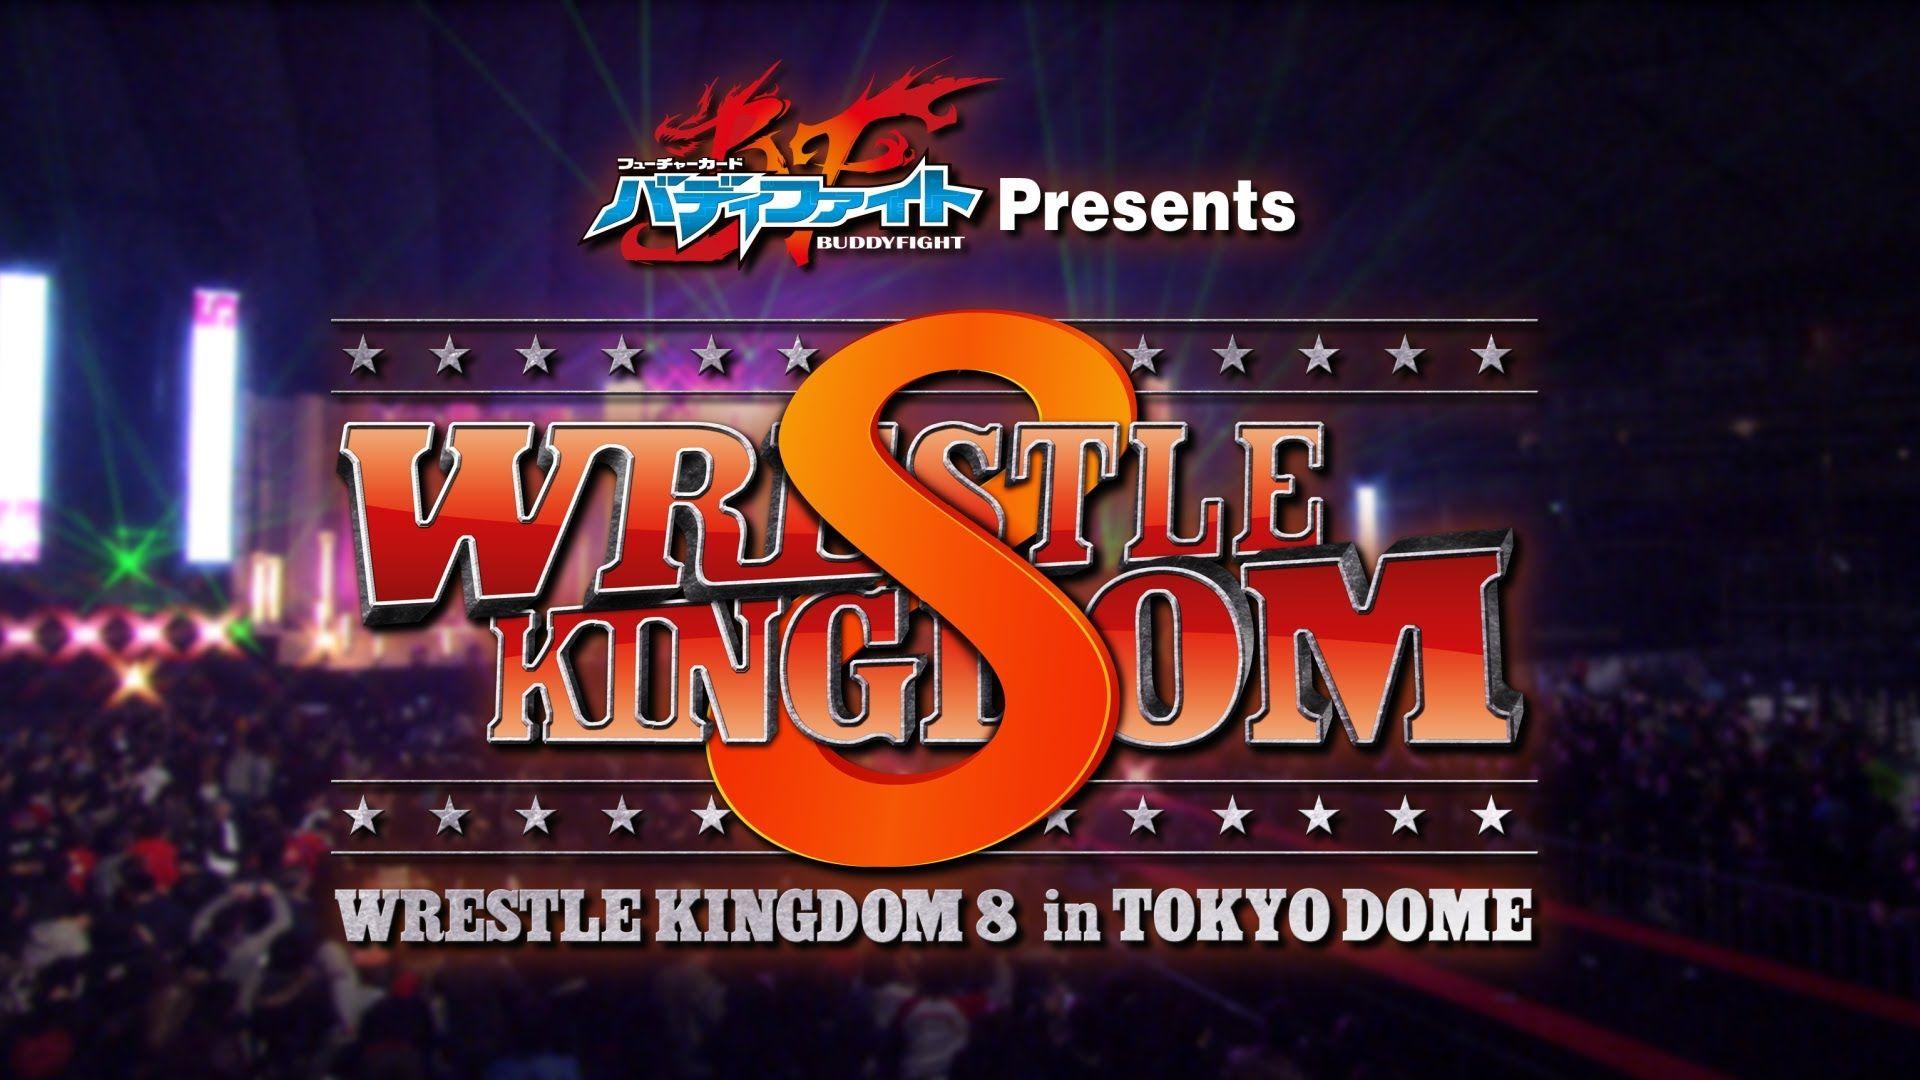 NJPW Wrestle Kingdom (1 4 14) Results, Review & Matches